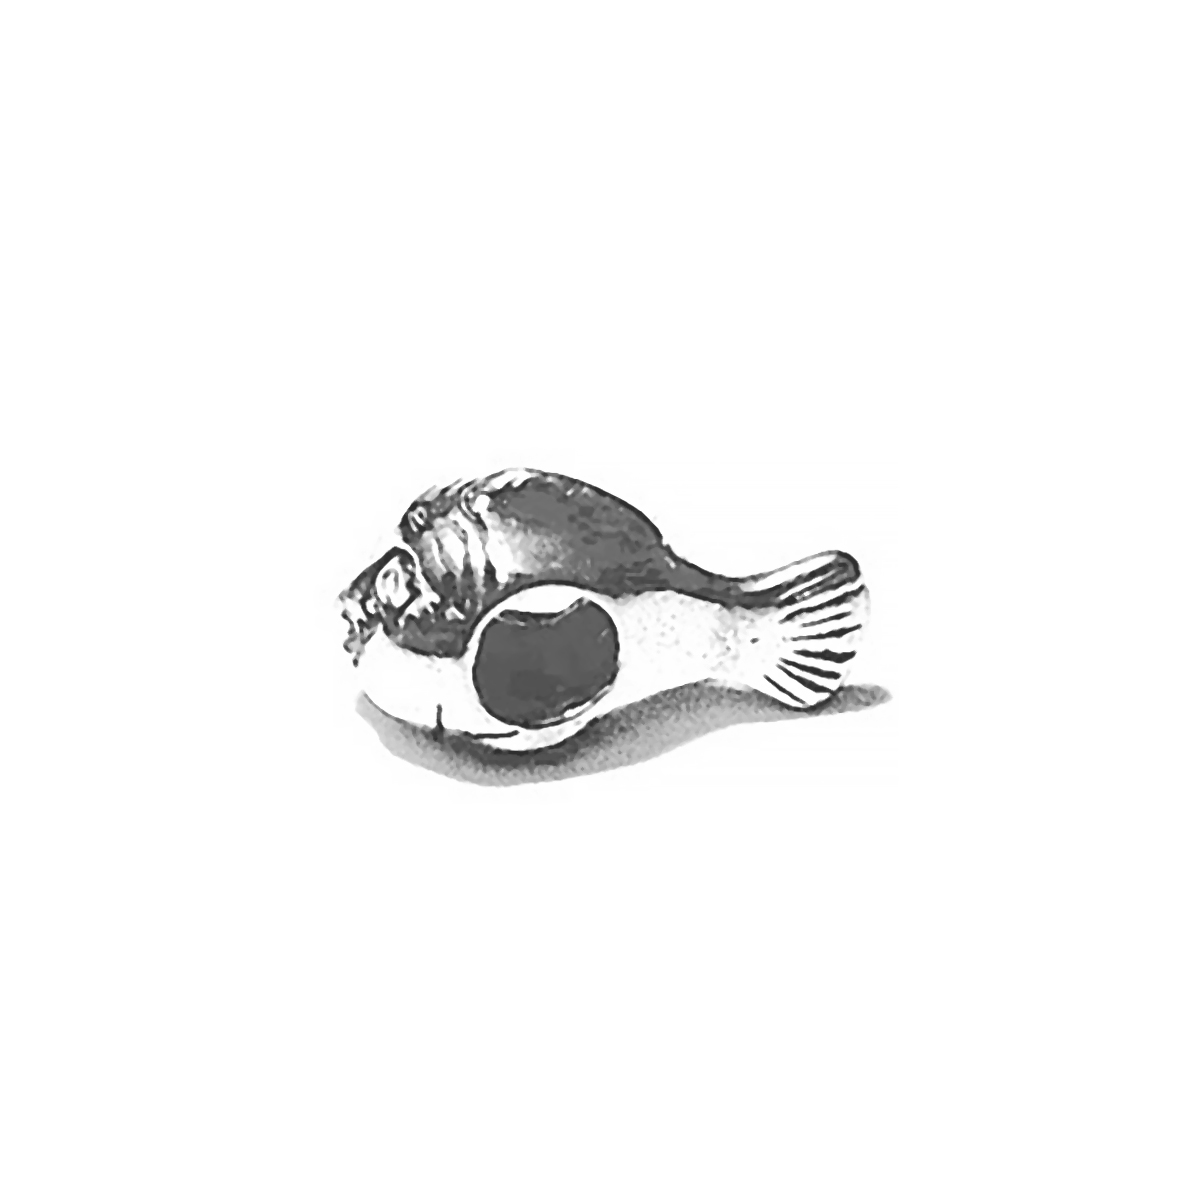 Sterling Silver Fish Rondelle Bead Spacer 16 mm 2.2 gram ID # 6428 - Click Image to Close